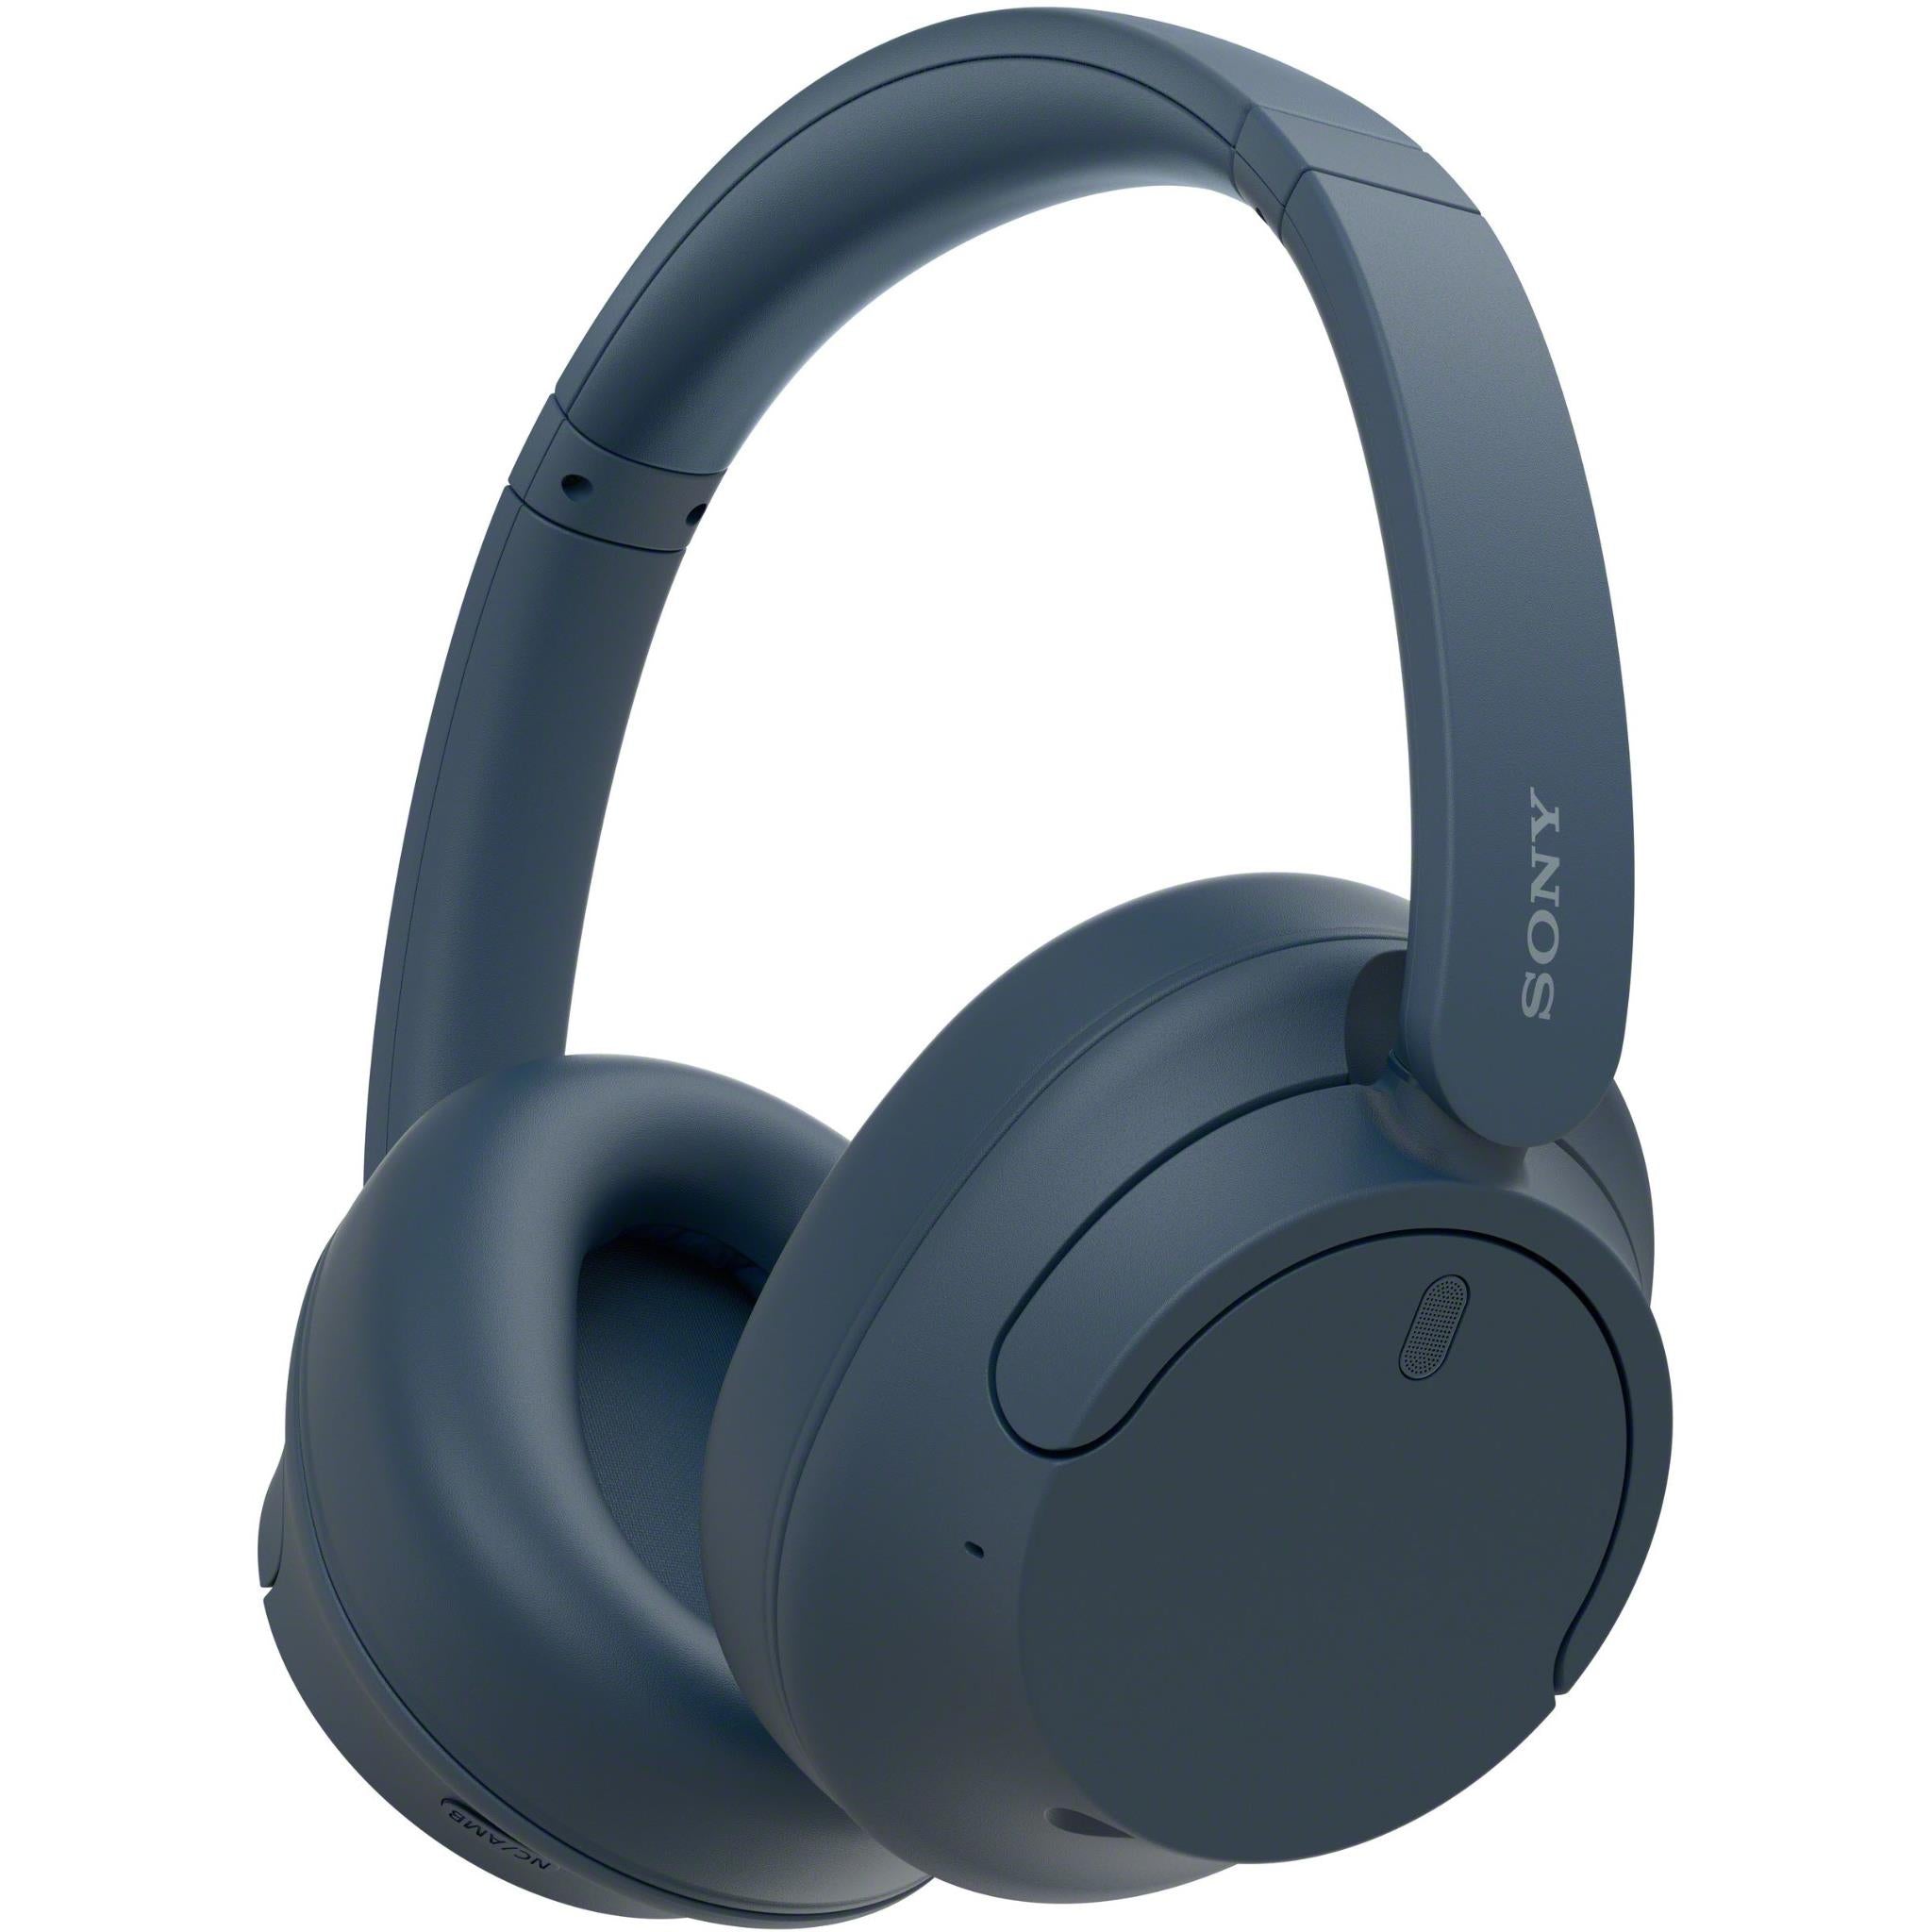 Sony WH-1000XM4 Noise-Canceling Headphone Review - Major HiFi